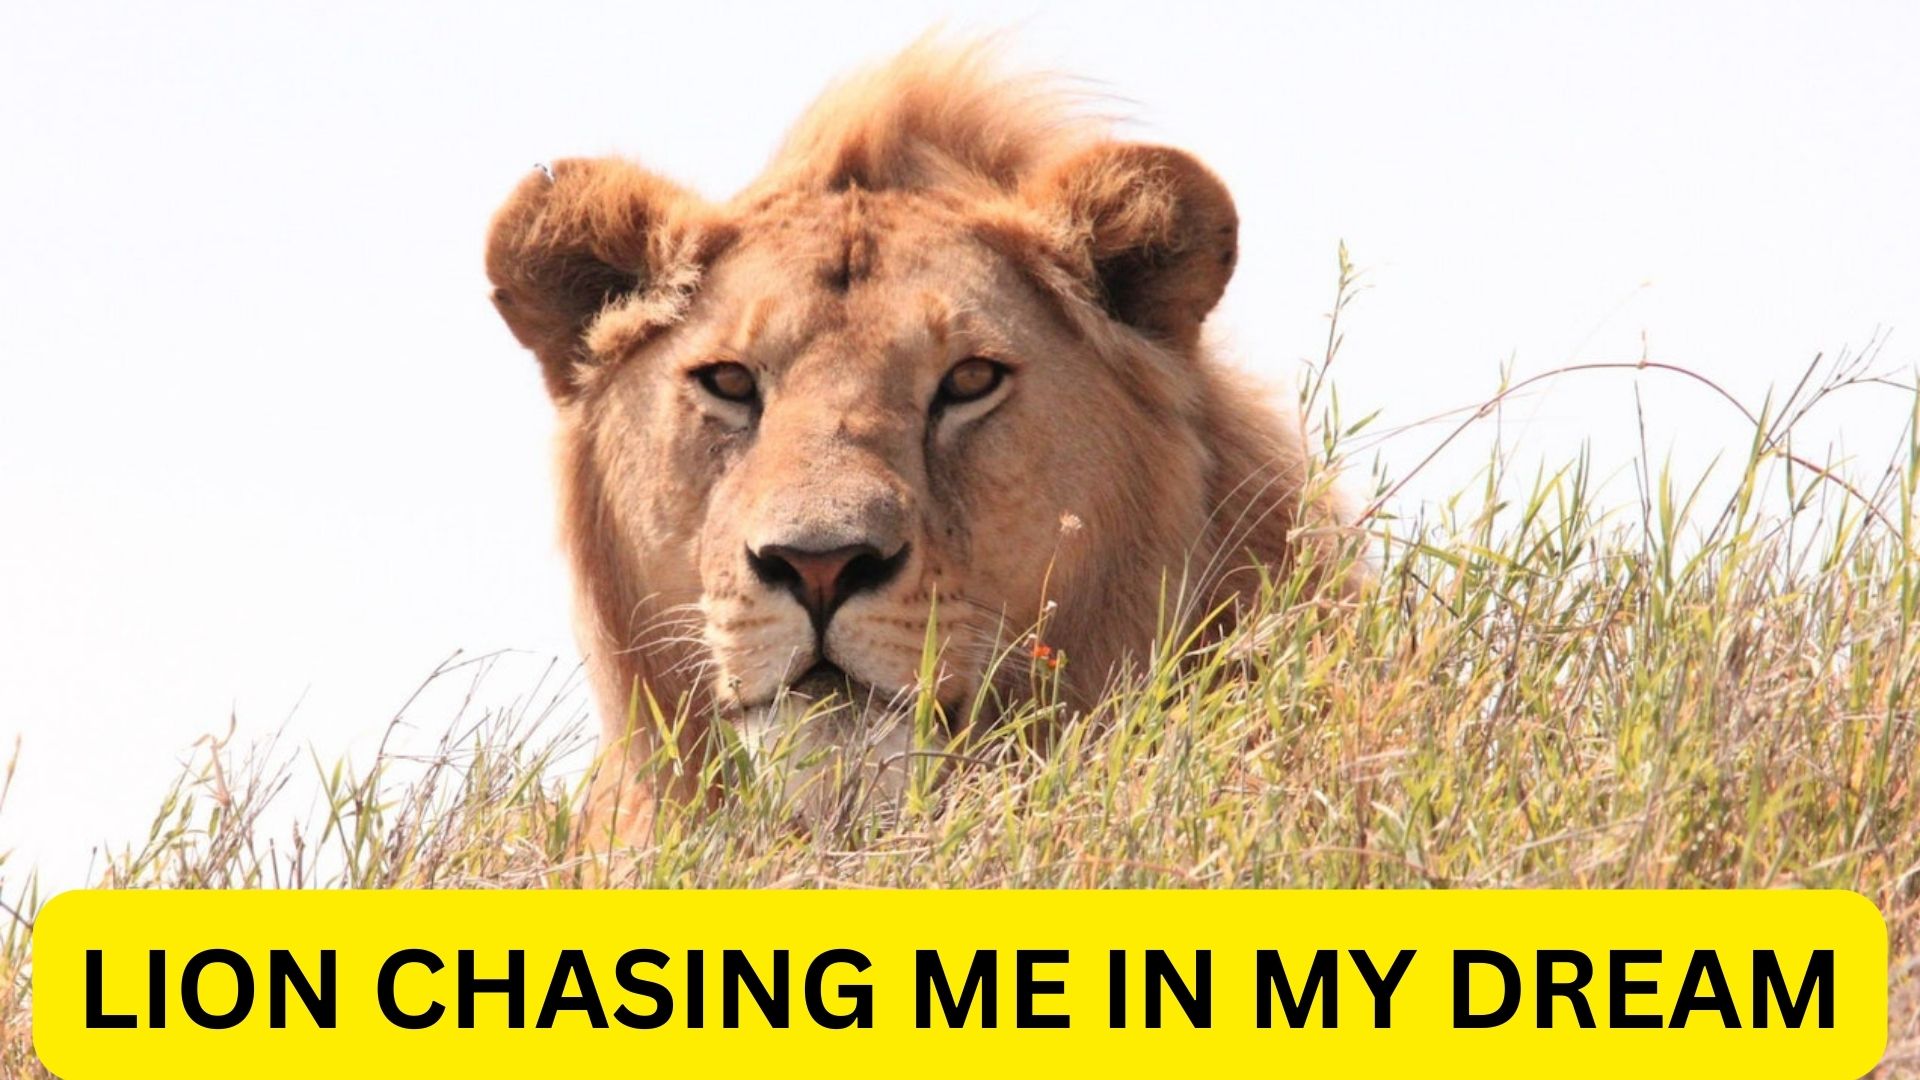 Lion Chasing Me In My Dream - Meaning, Interpretation, & Symbolism